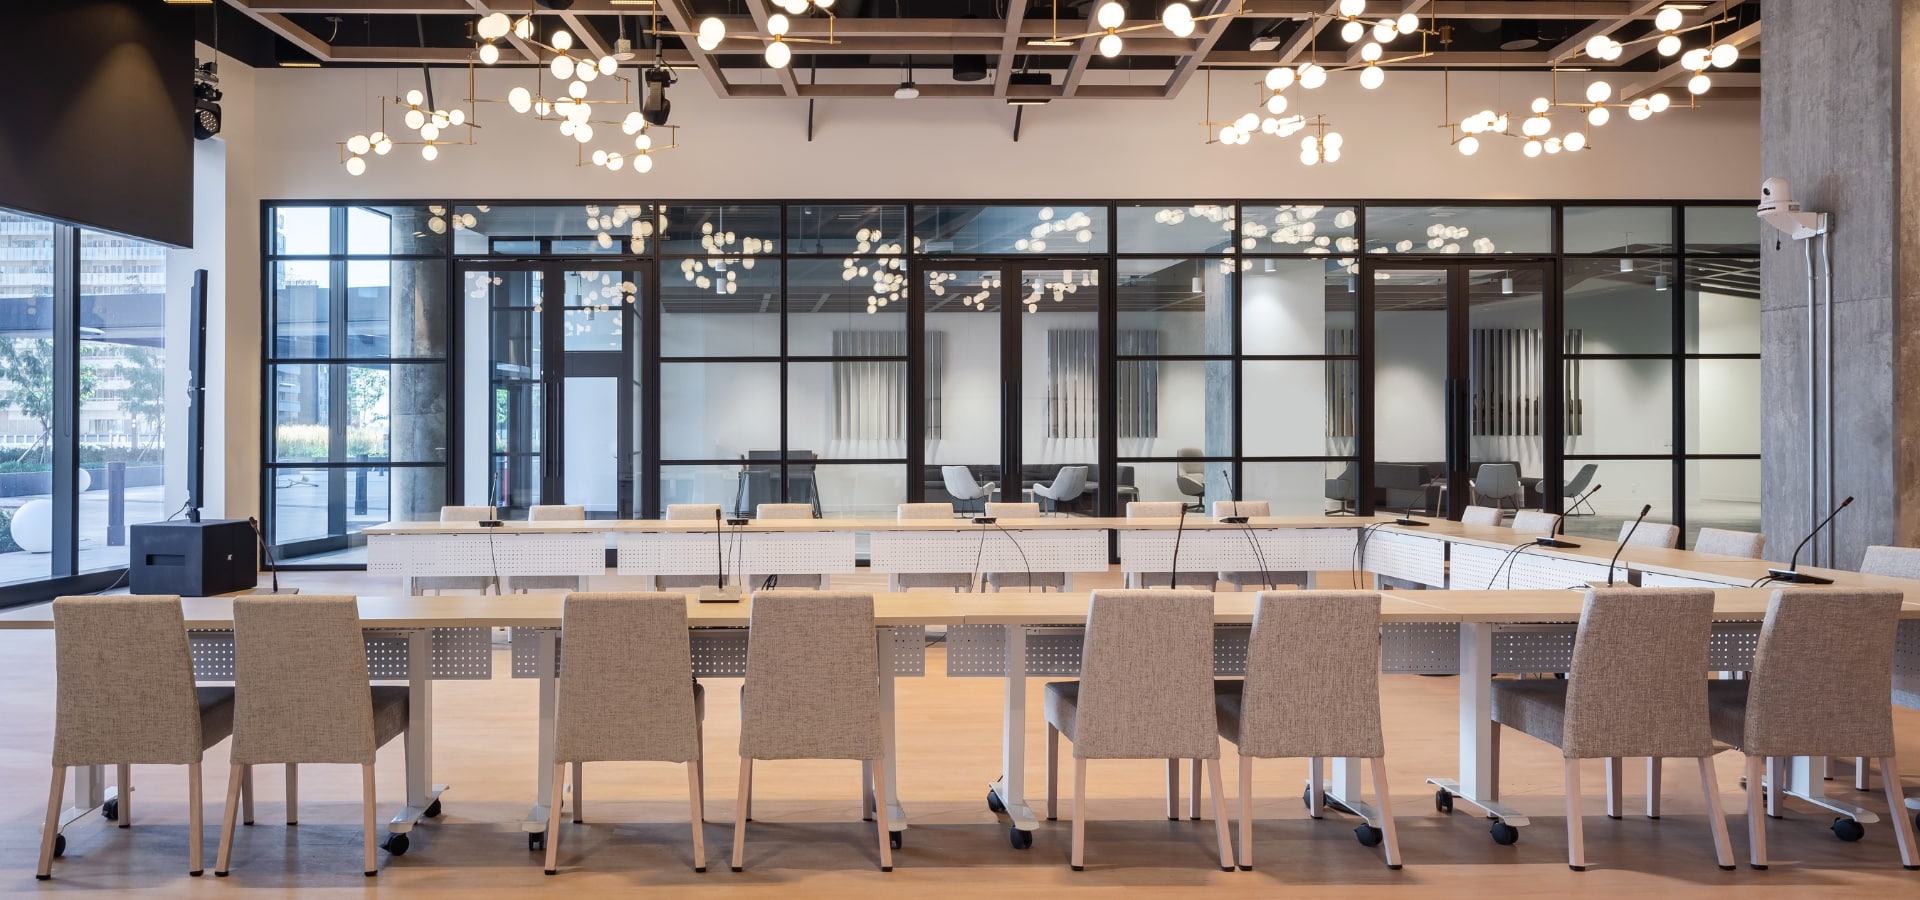 Hero image for Toronto & GTA’s Most Unique Meeting Rooms & Meeting Spaces